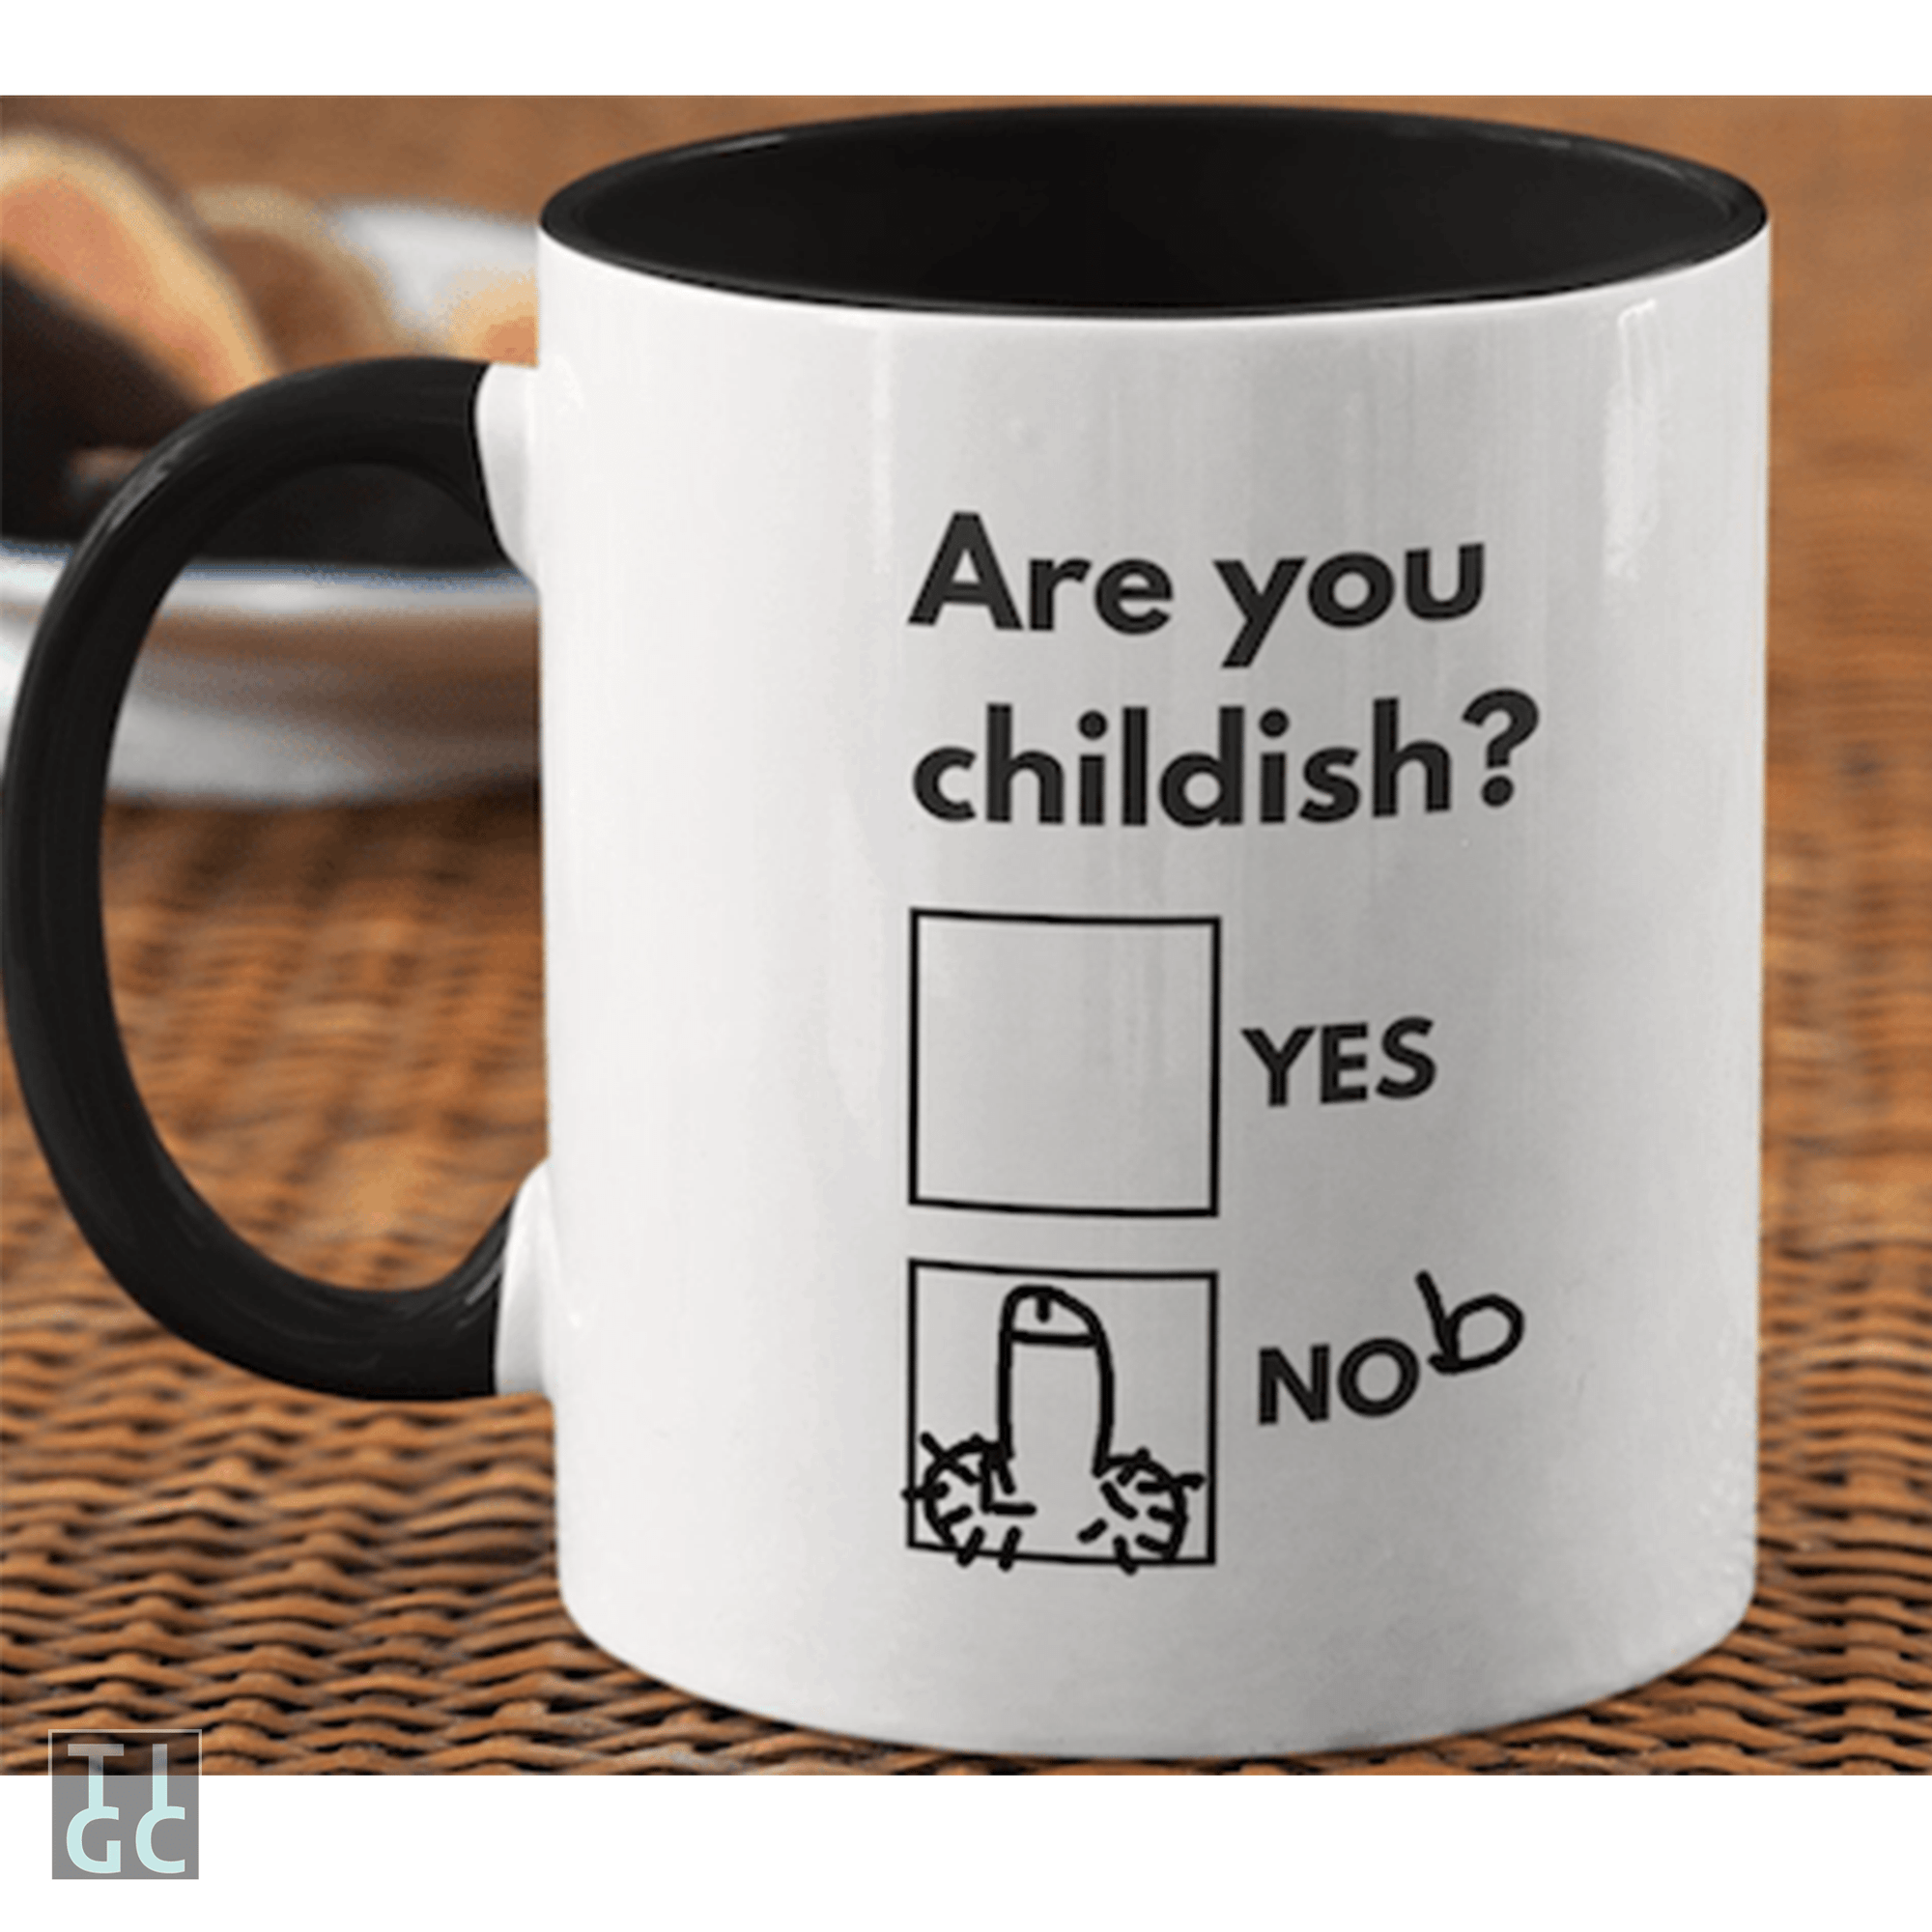 TIGC The Inappropriate Gift Co Are you childish? Yes / Nob mug